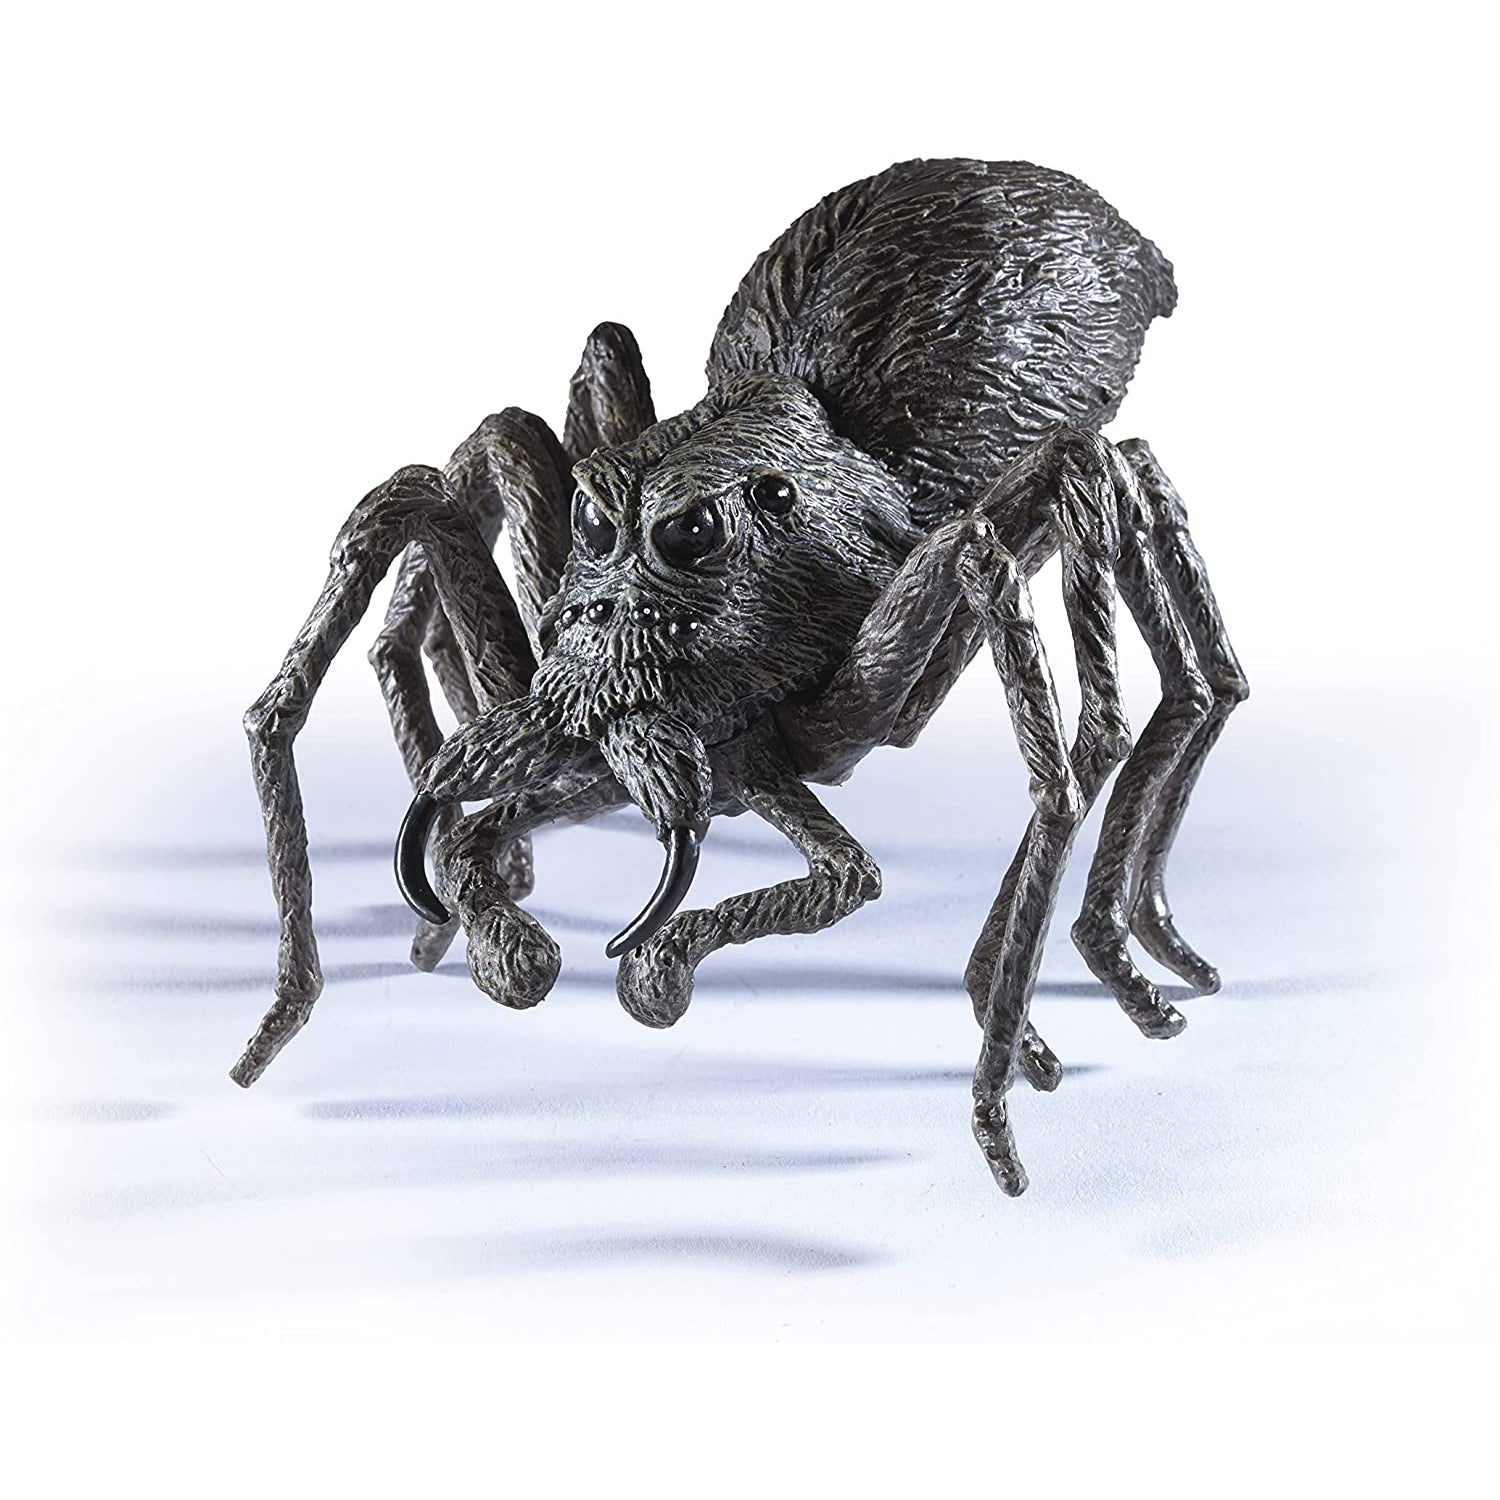 The Noble Collection - Magical Creatures Aragog